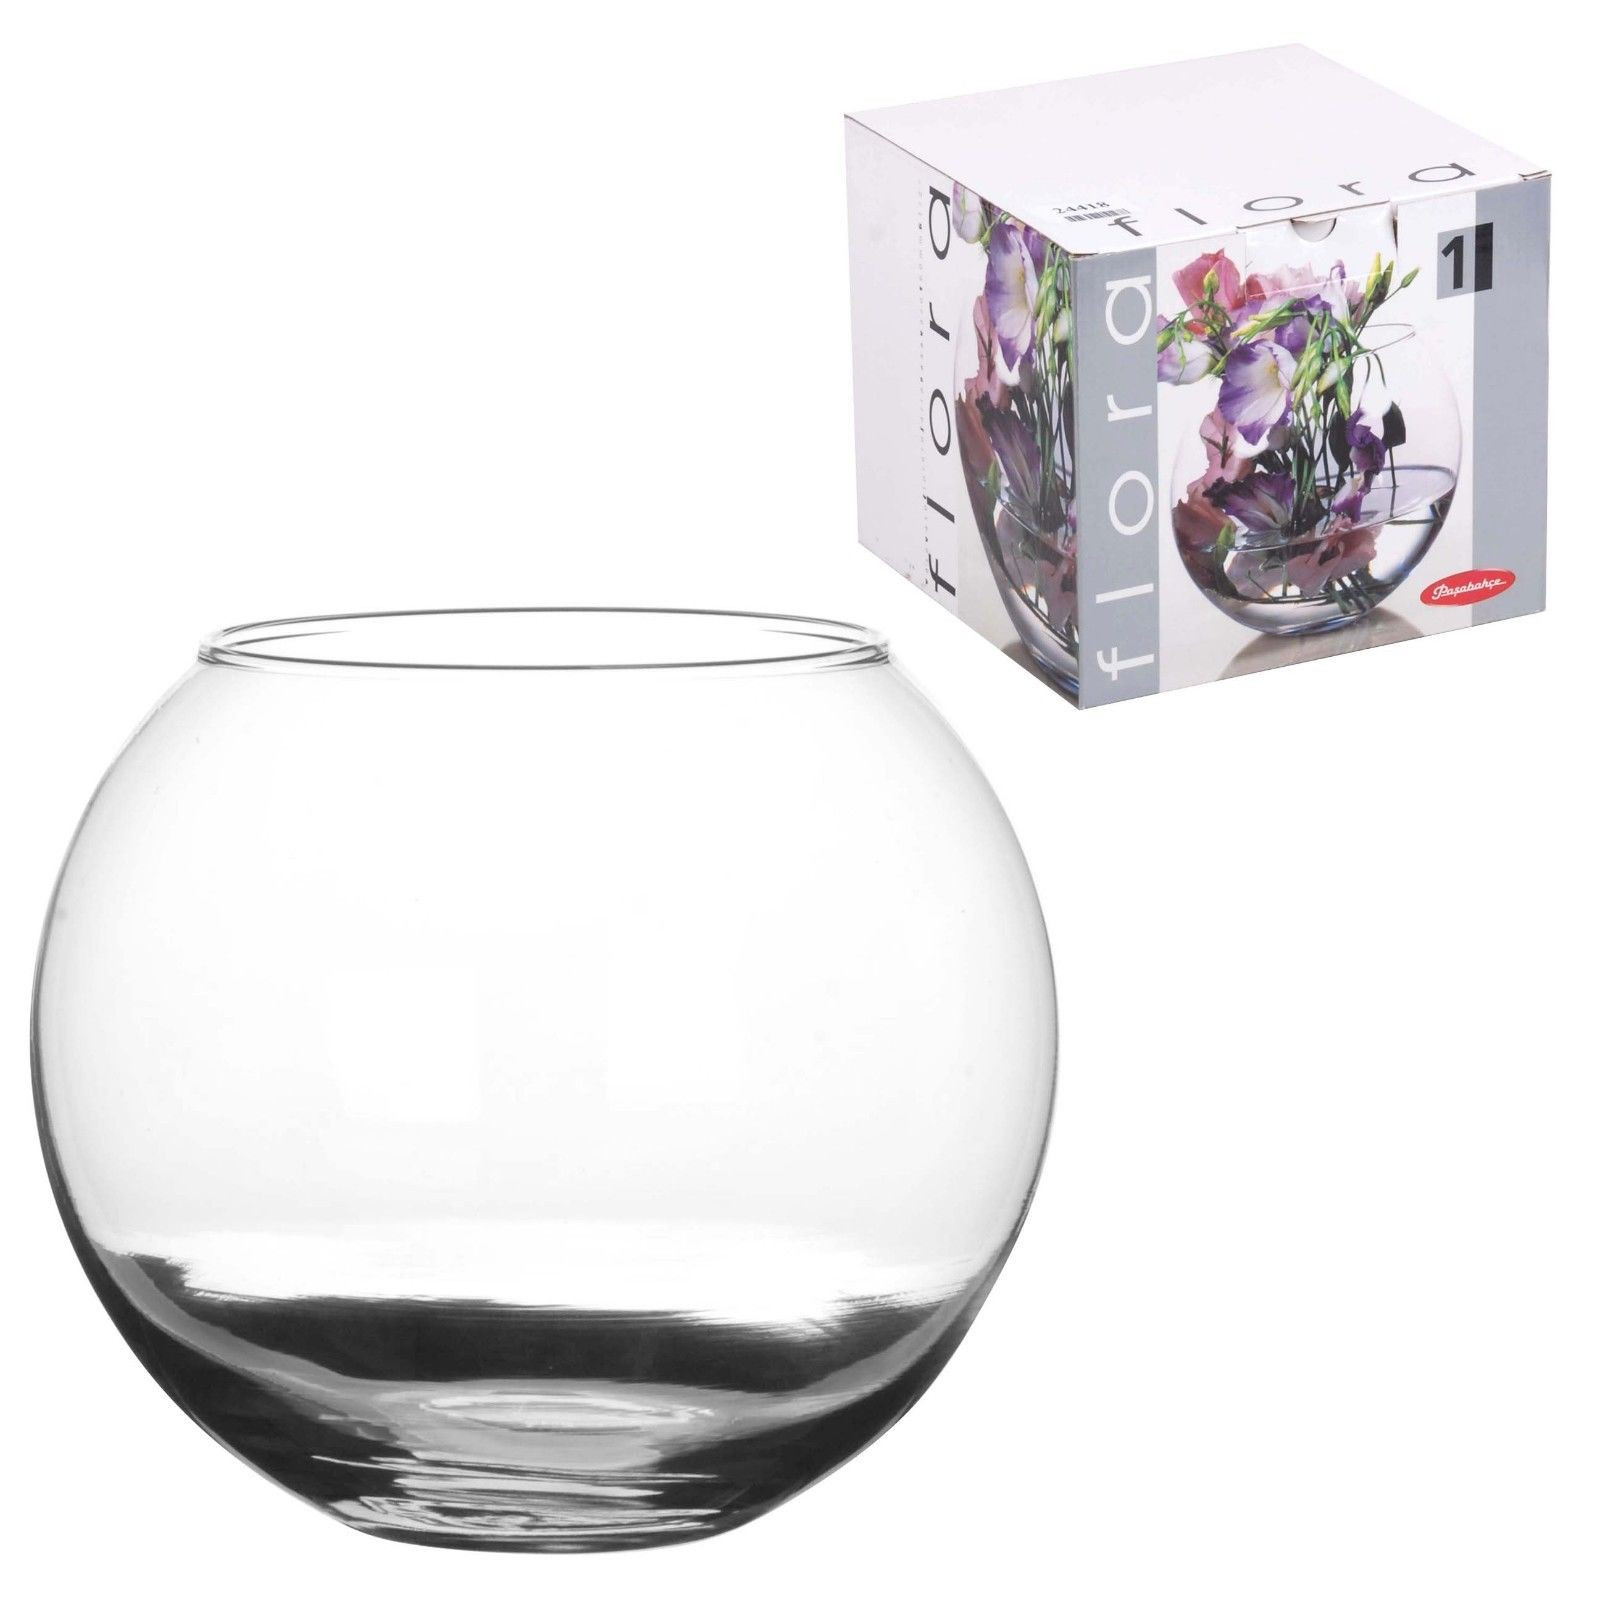 27 Fashionable Floating Candle Cylinder Vase Sets 2024 free download floating candle cylinder vase sets of pasabahac2a7e flower vase glass bowl centrepiece round balloon bubble pertaining to pasabahac2a7e flower vase glass bowl centrepiece round balloon bubbl